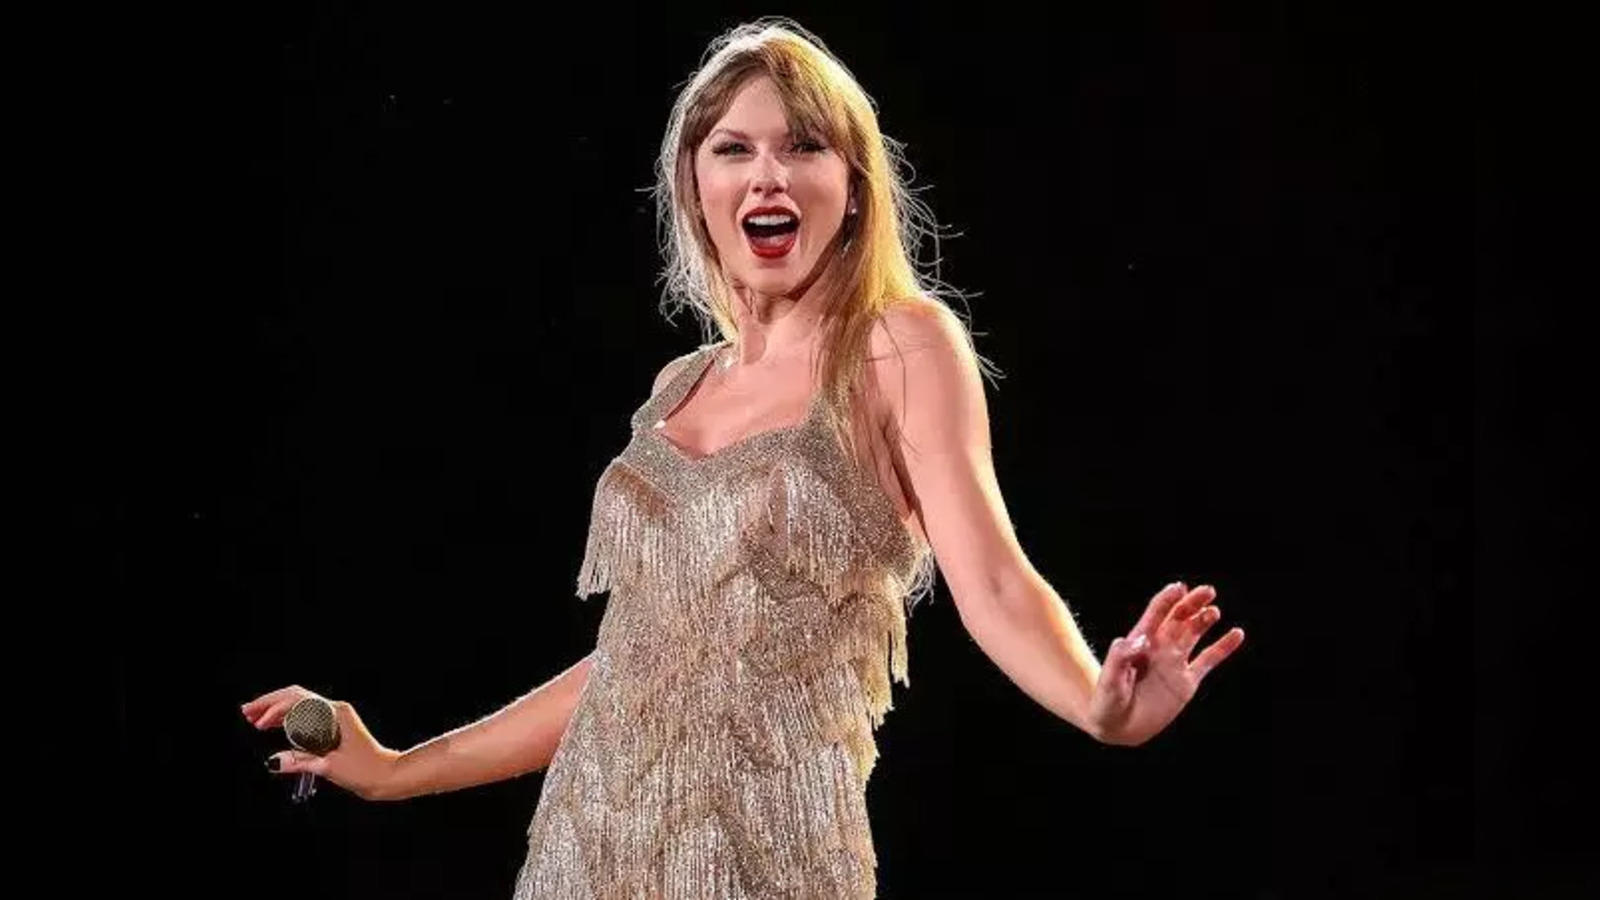 Taylor Swift Will Play Some Surprise Songs Multiple Times on Tour